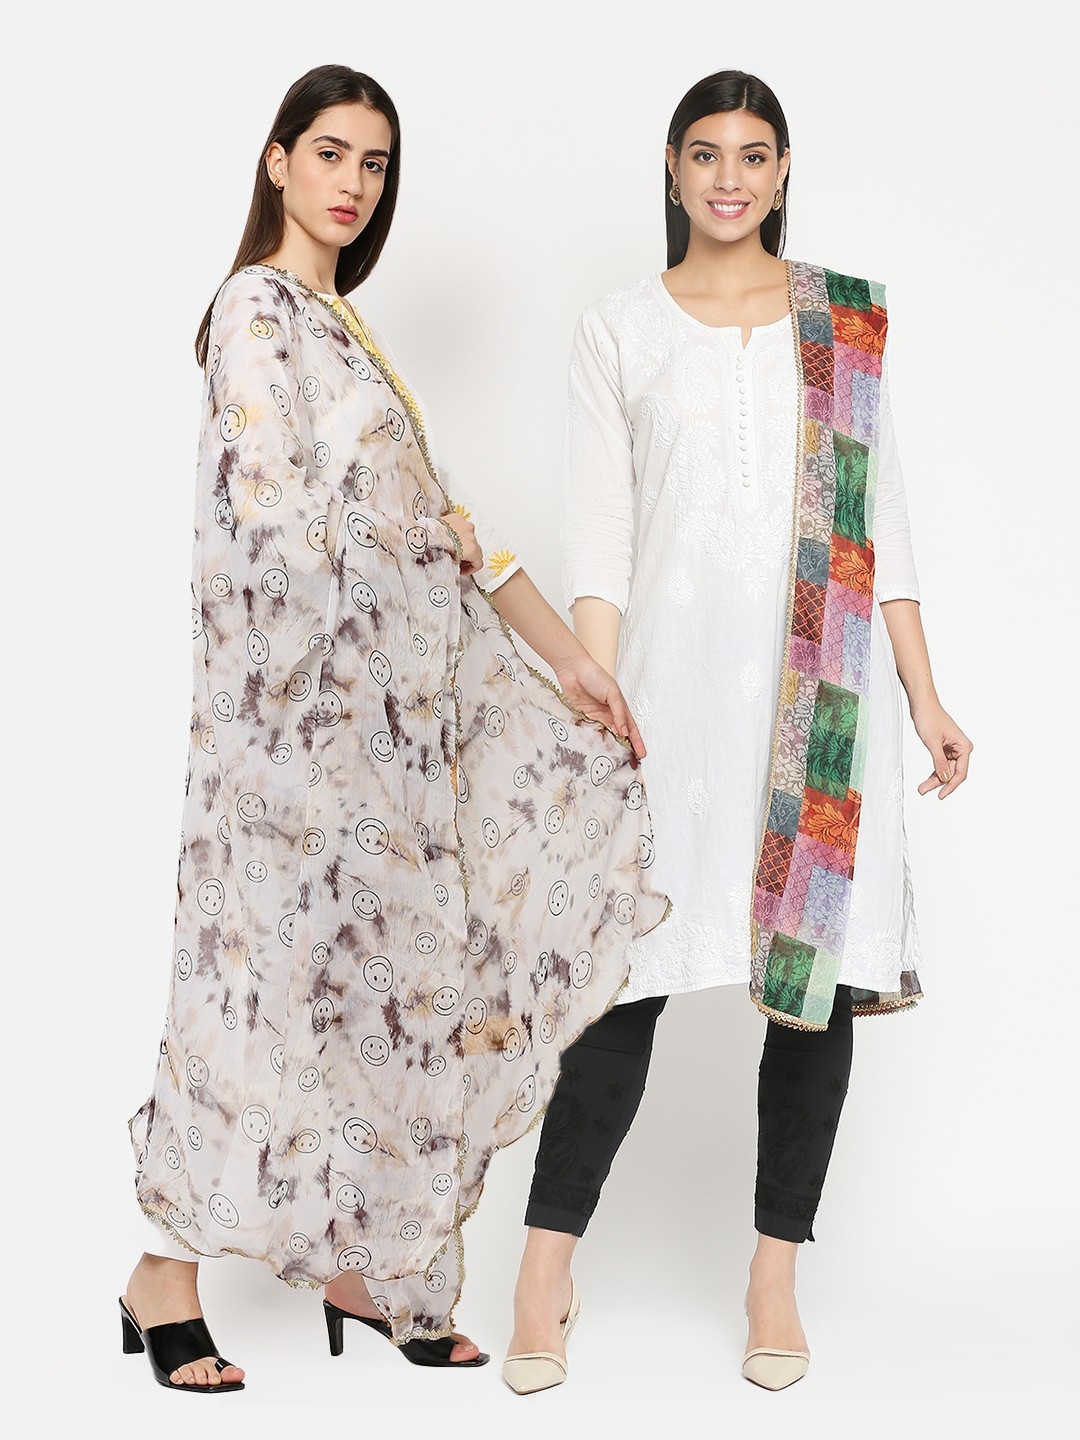 Get Wrapped | Get Wrapped Digital Printed Dupatta with Border Combo for Women - Pack of 2